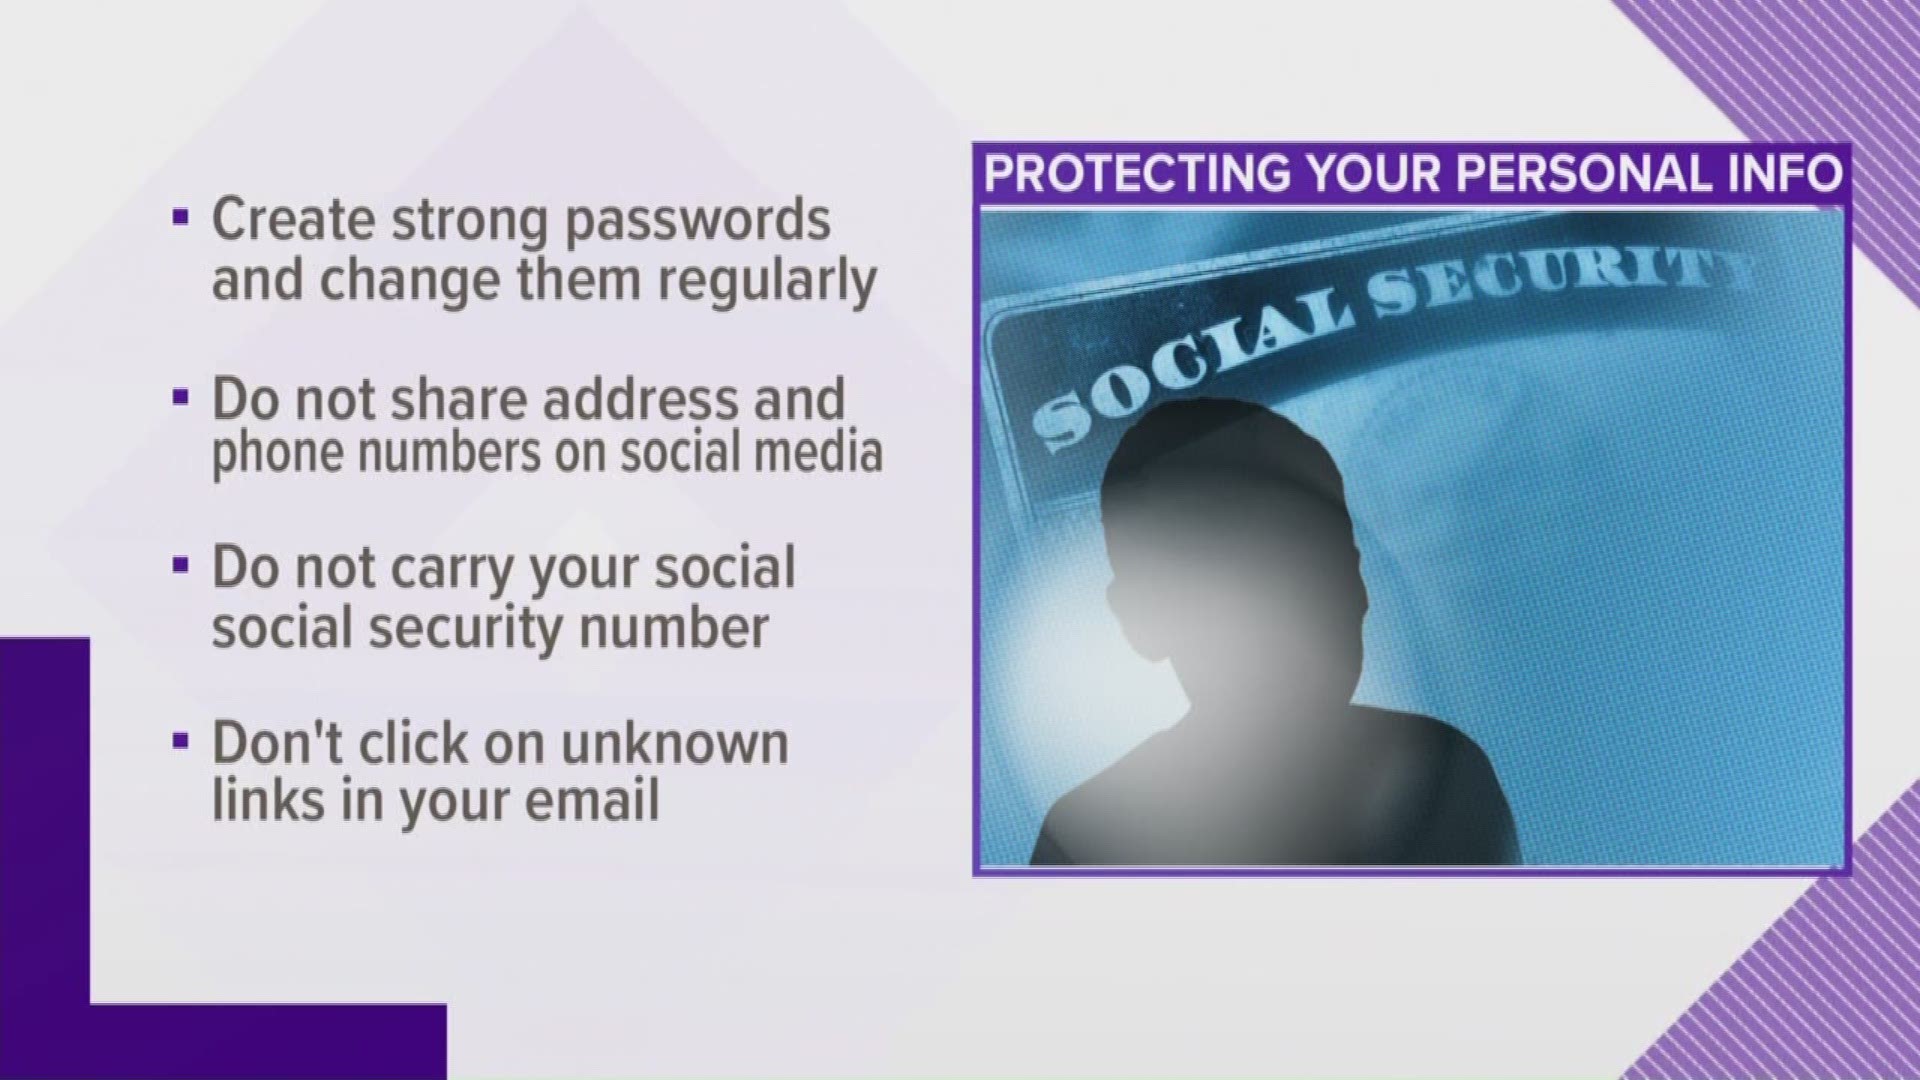 Tips on how to protect your identity